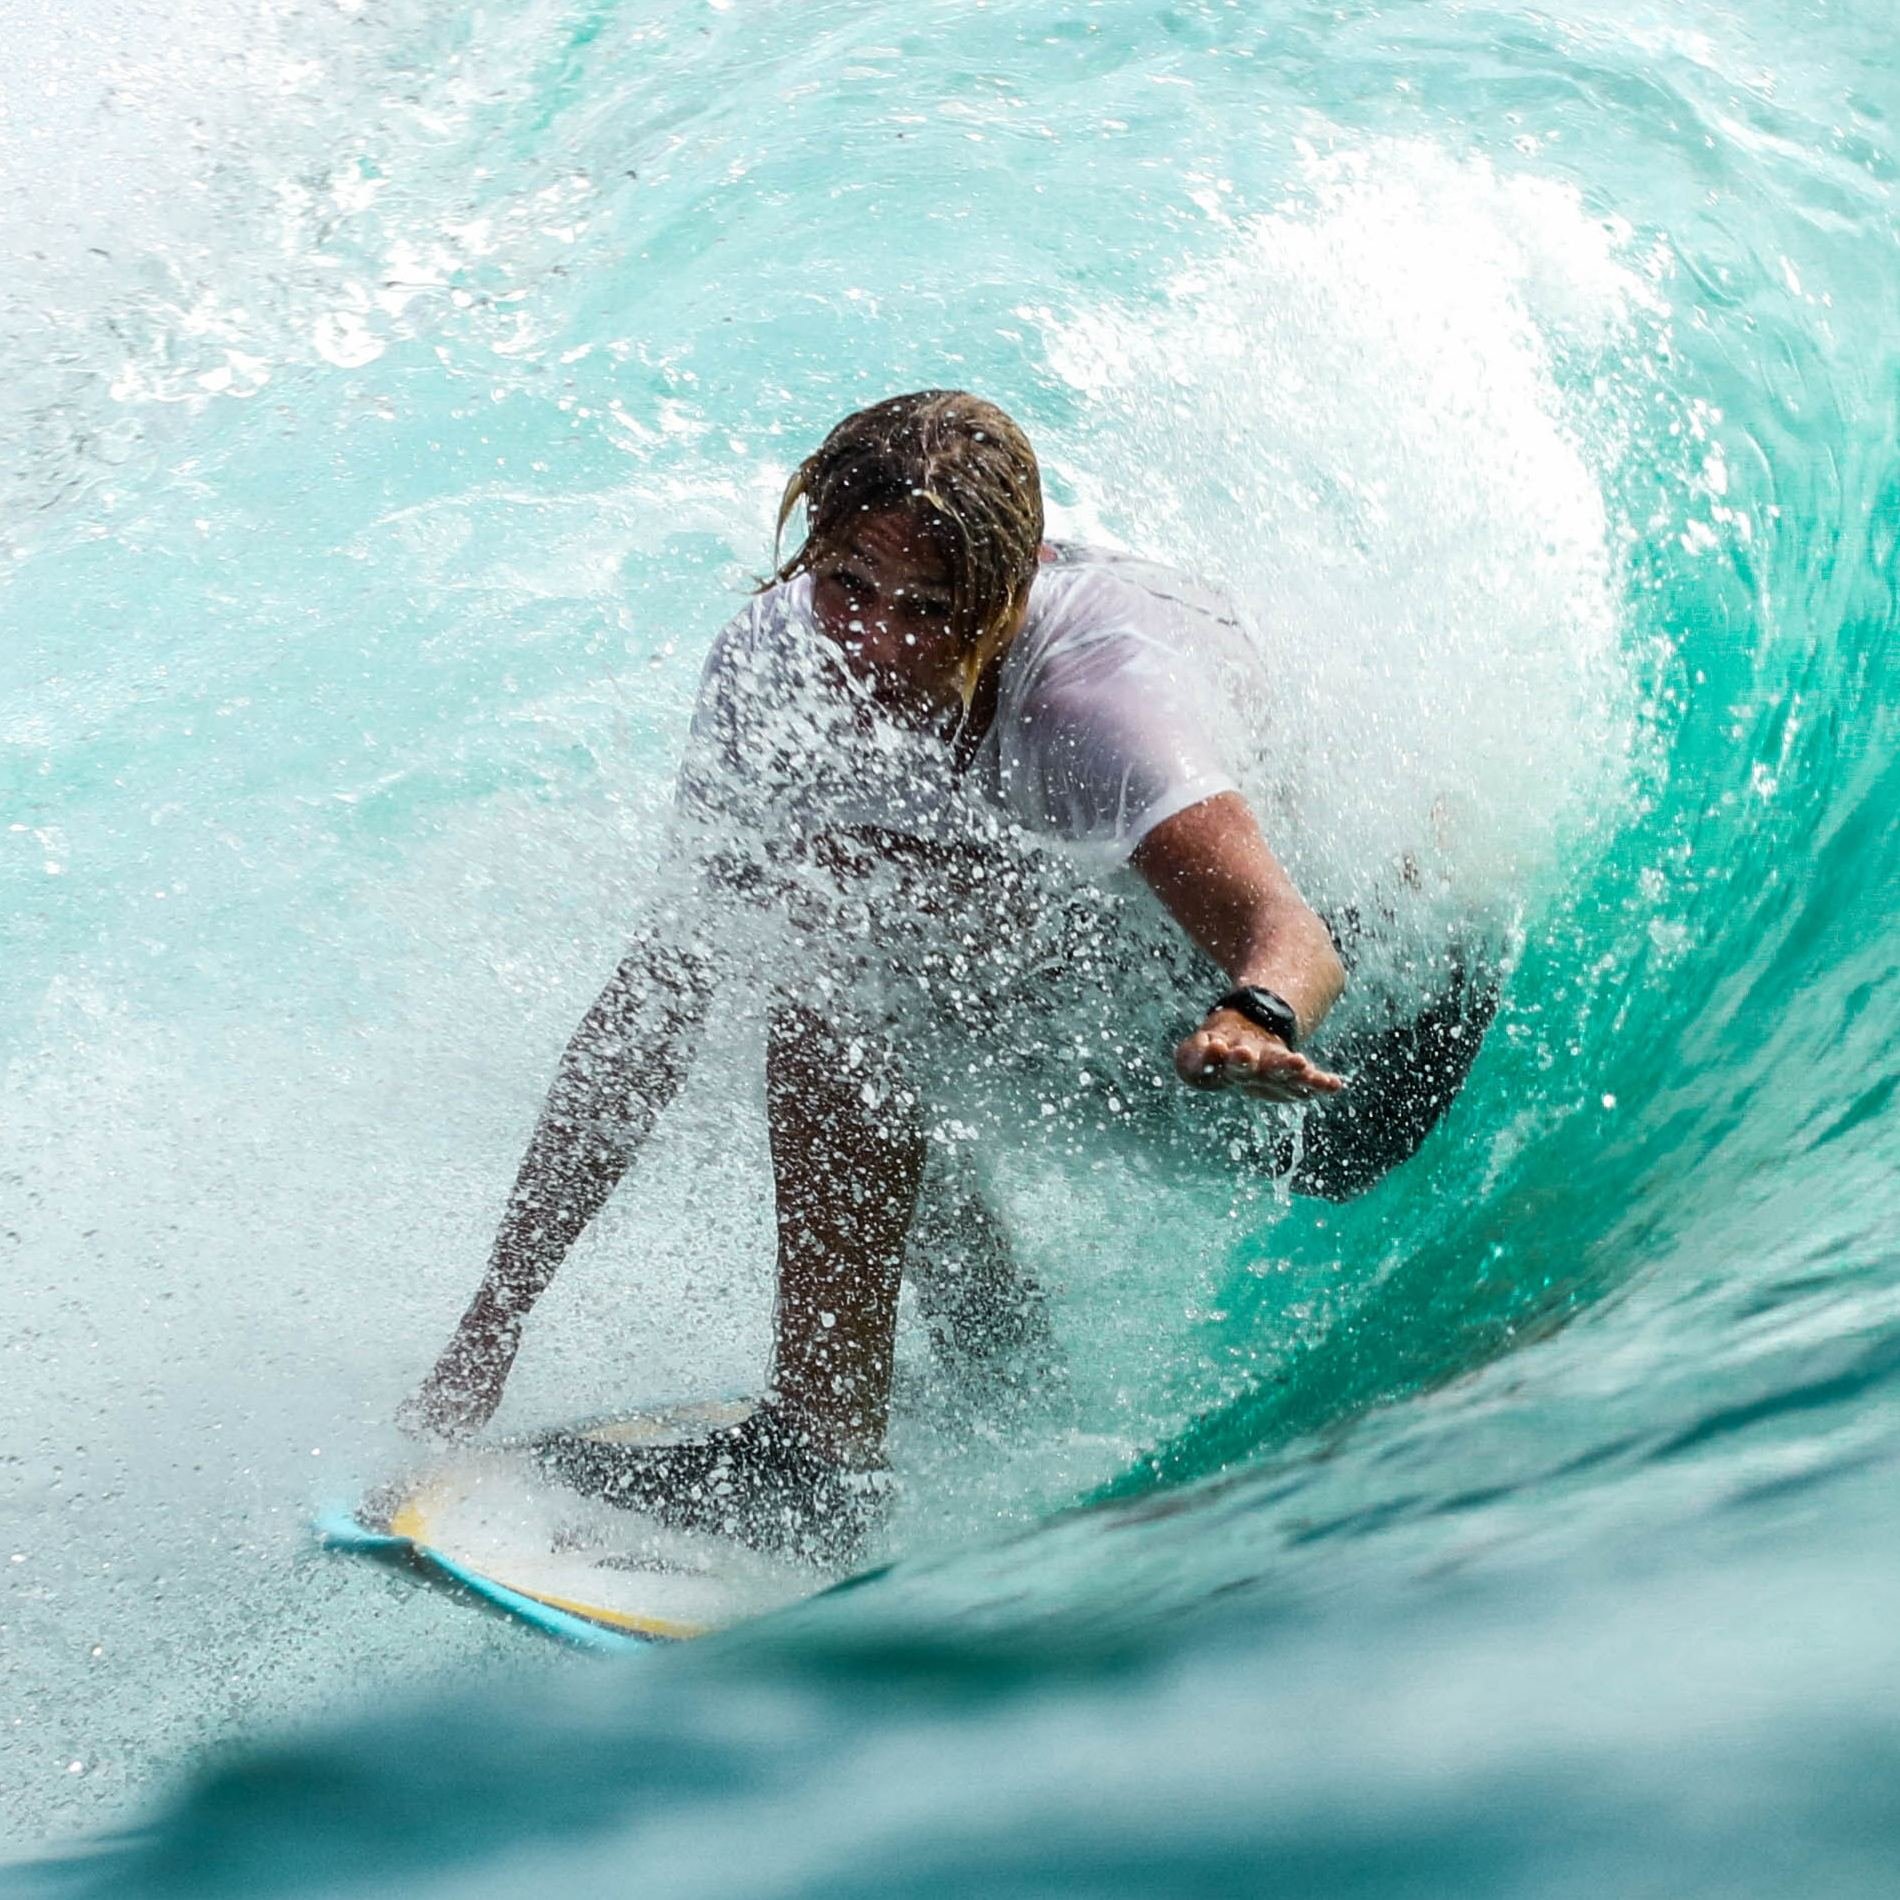 Our favourite this week: from Kevin Jackson to Surfing King